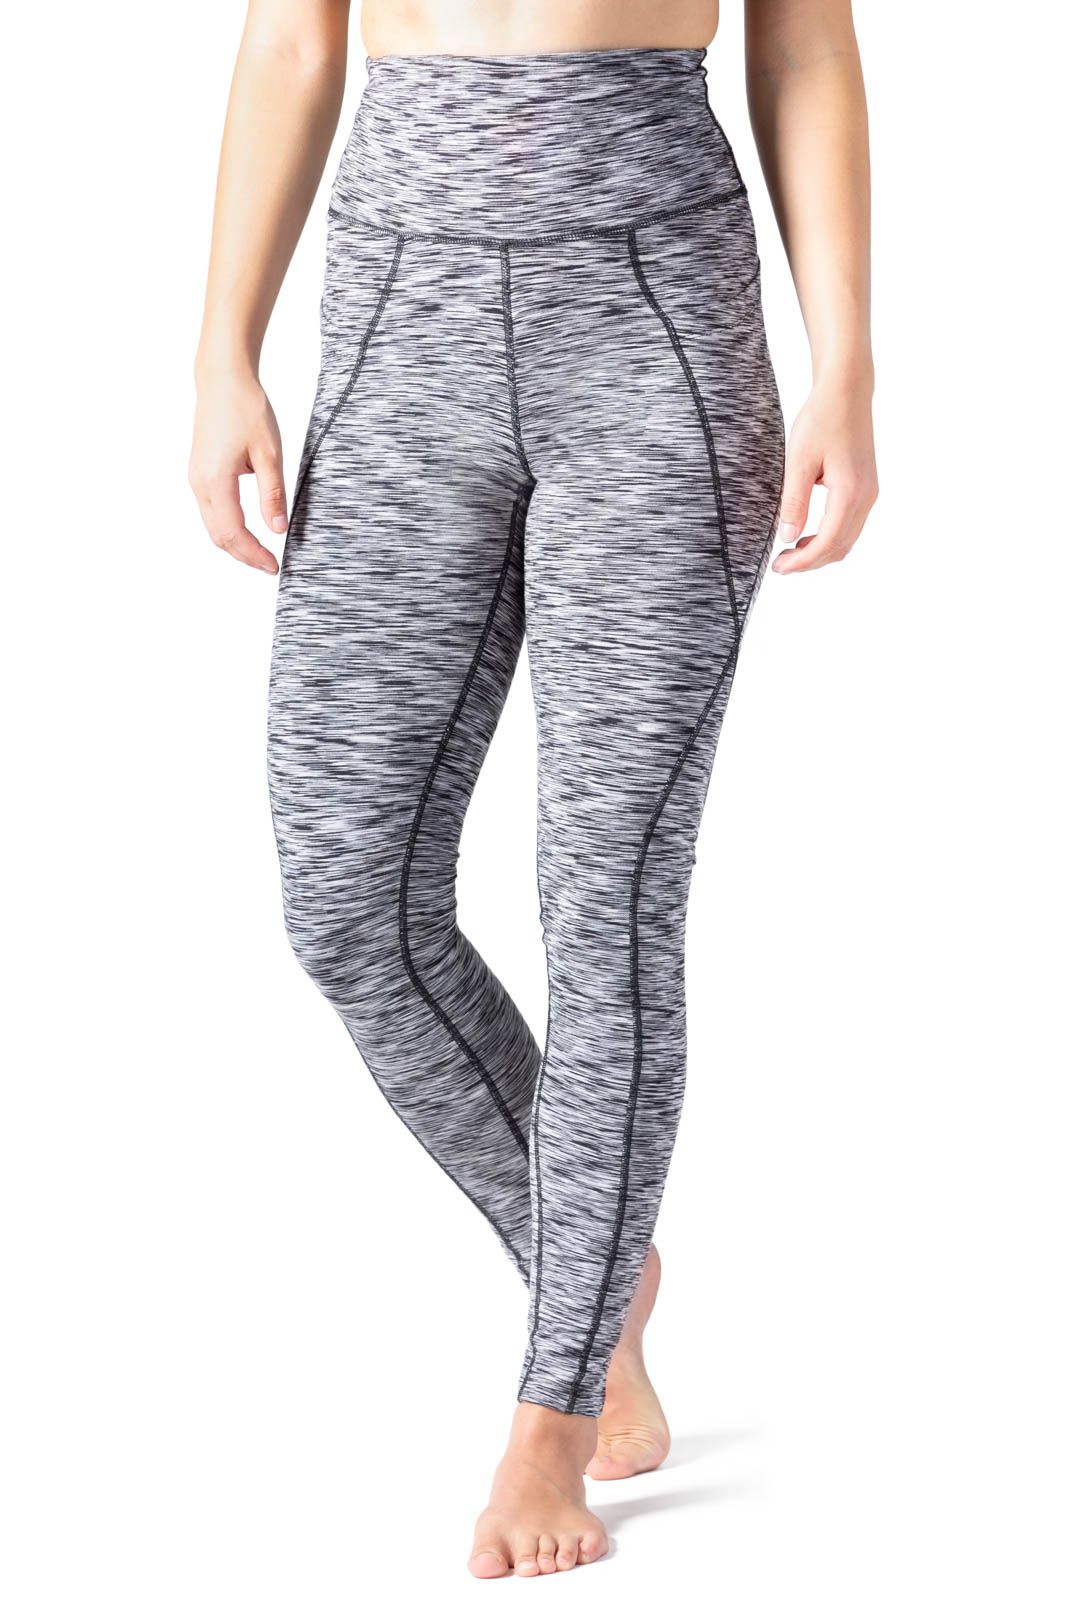 Women's EcoFabric™ Super High-Rise Active Legging Tight Womens>Activewear>Yoga Pants Fishers Finery Black White Space Dye X-Small 